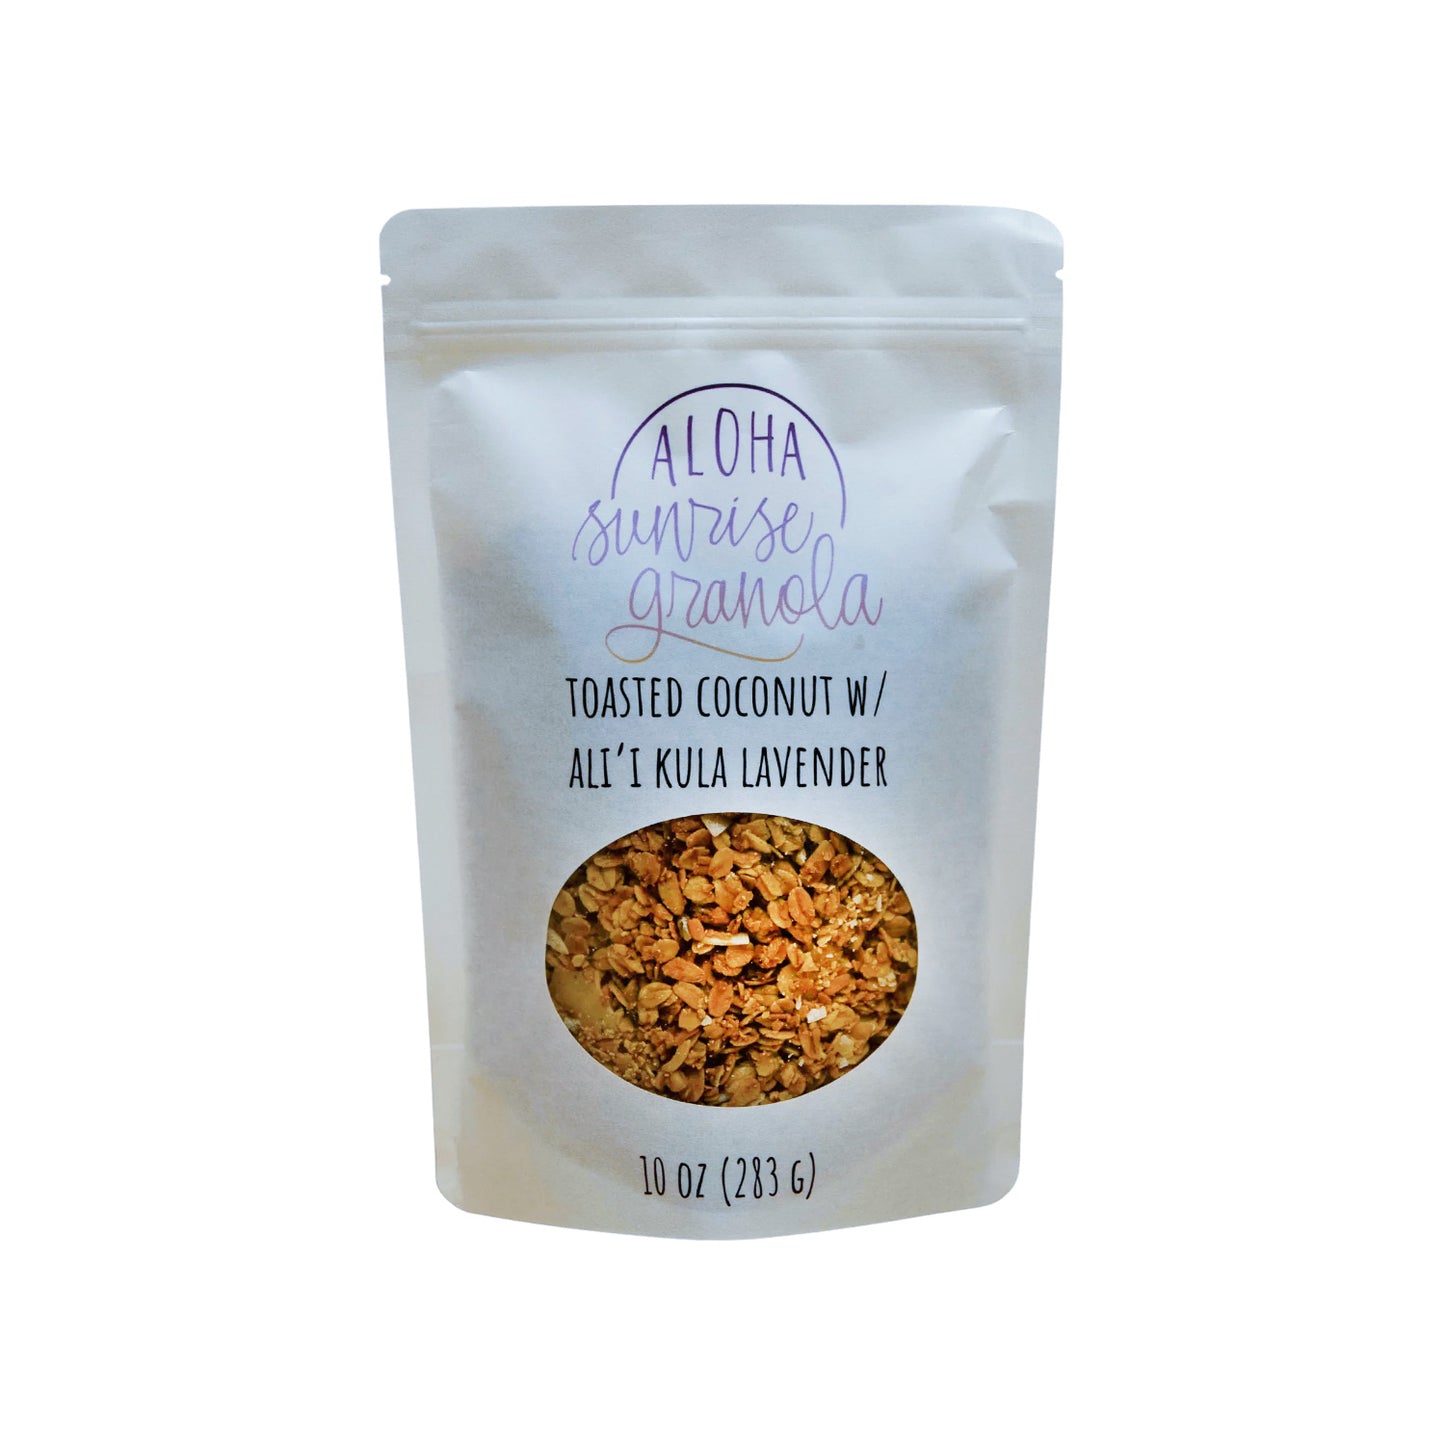 Hand-crafted Artisan Granola - Lavender & Toasted Coconut 10oz